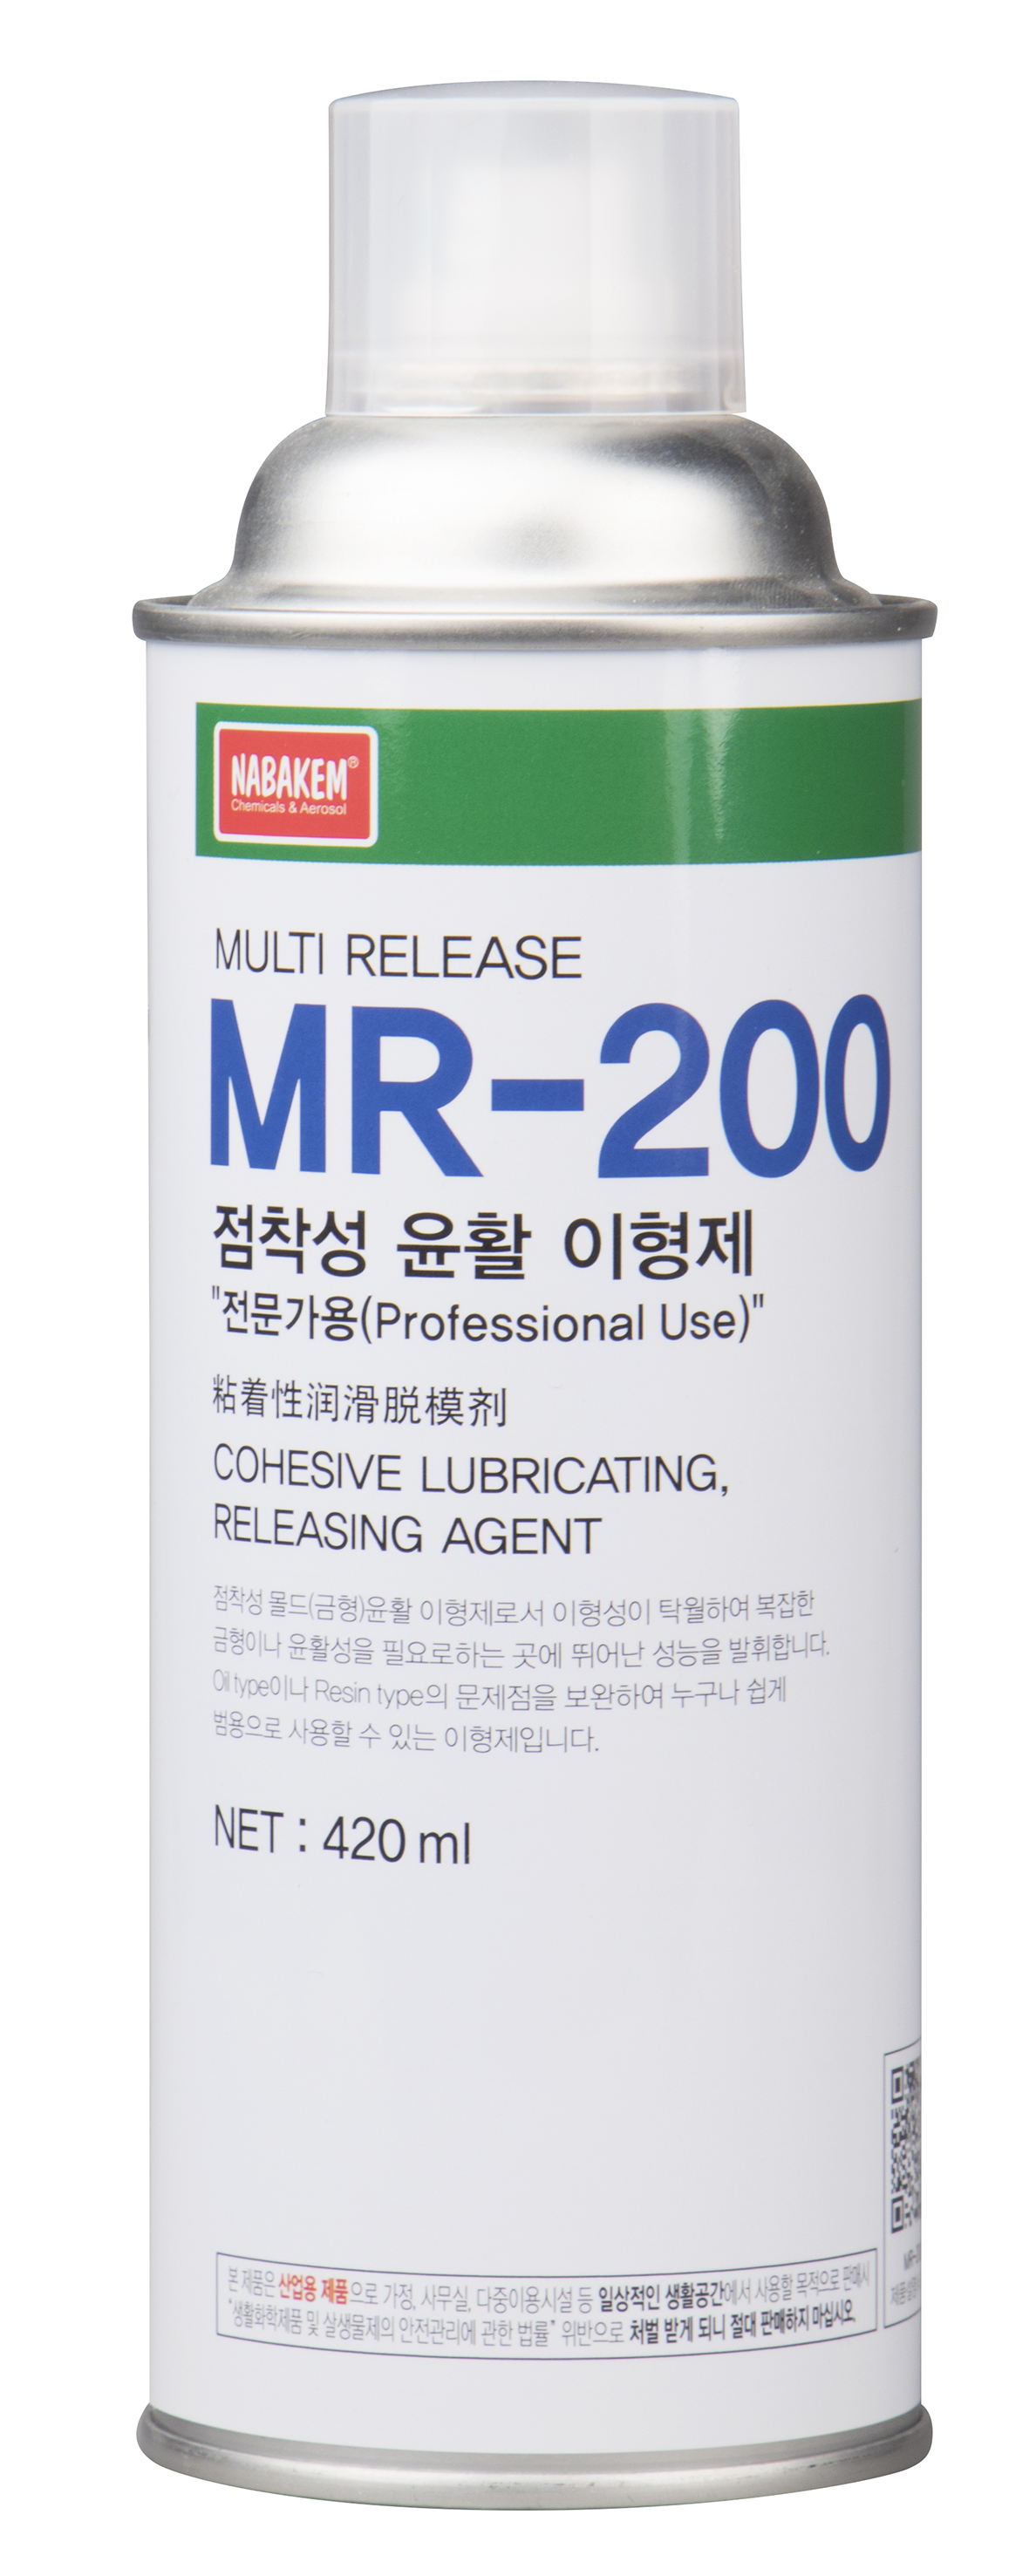 Lubricant/Mold release agent - Products - 남방씨앤에이